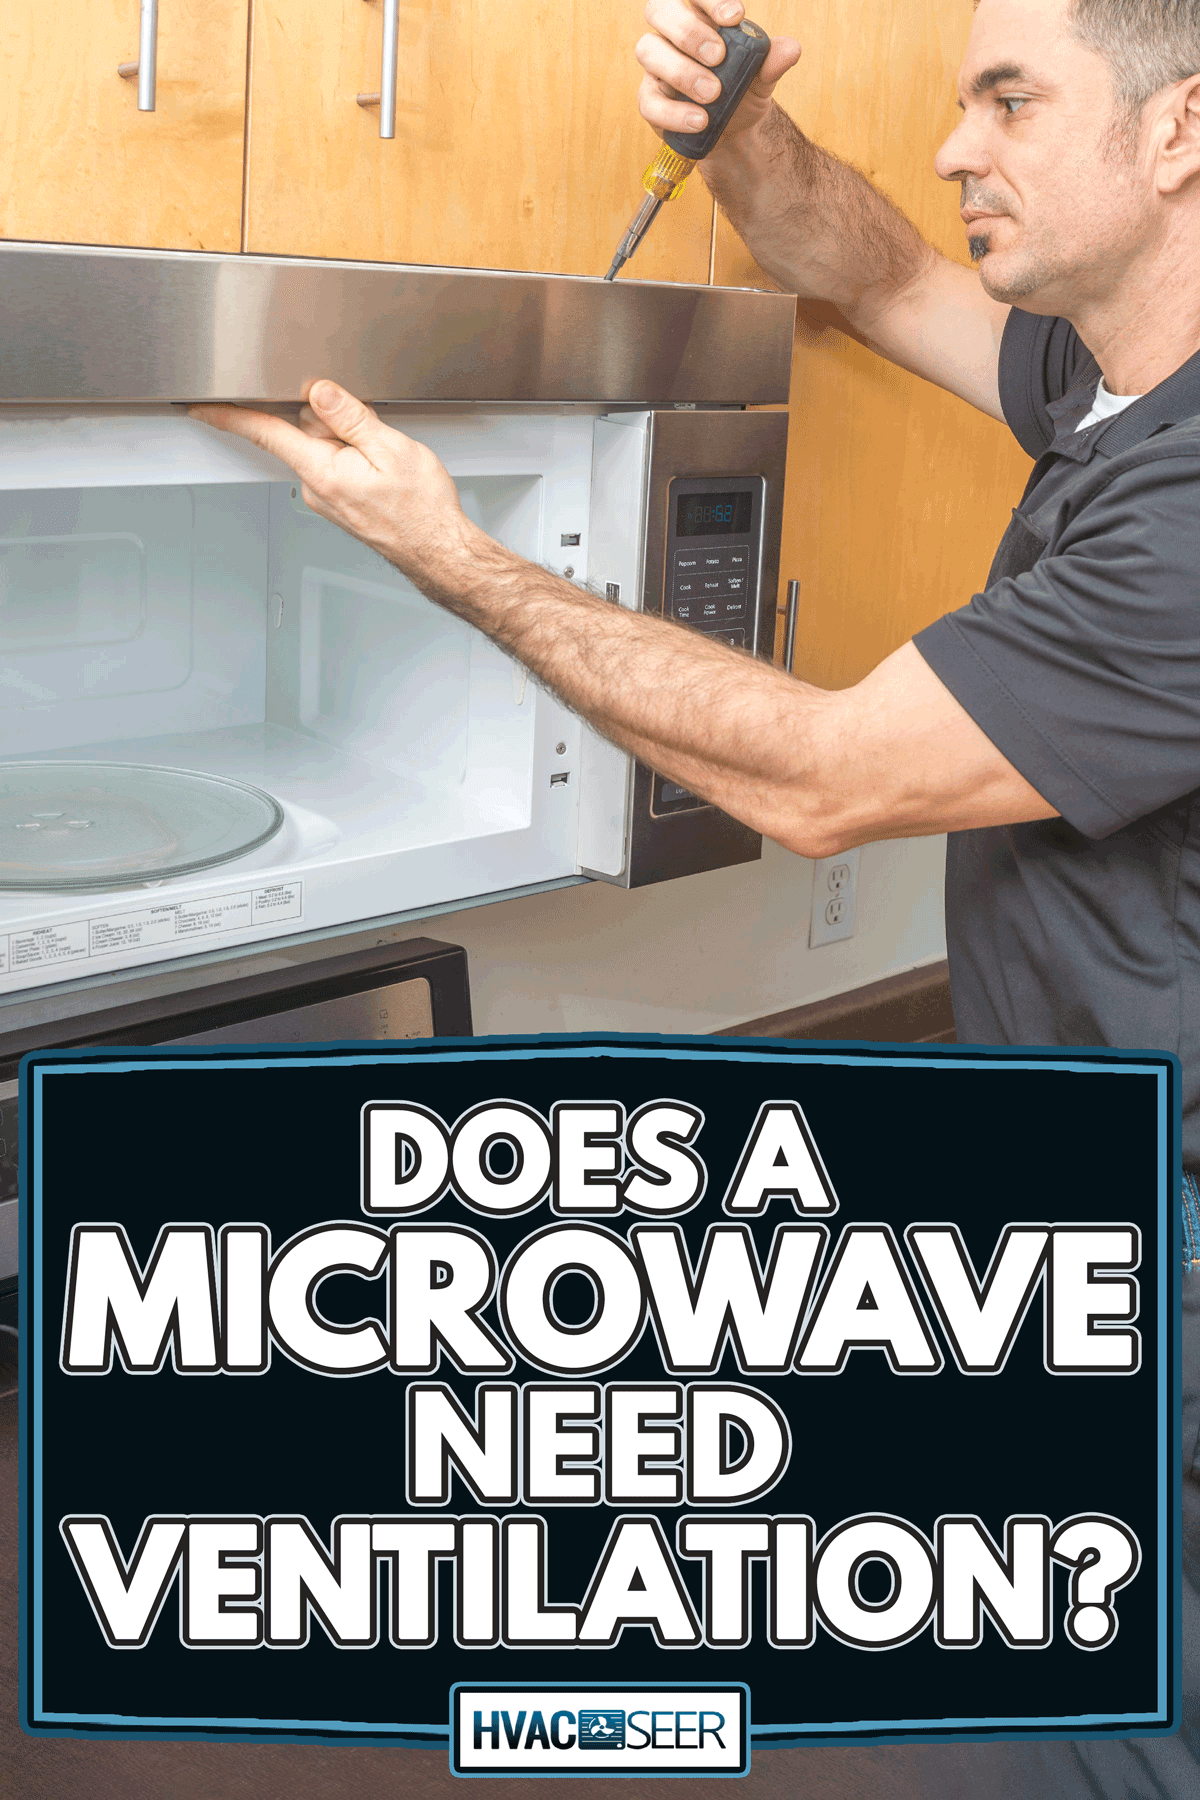 Appliance technician taking the vent cover off of a microwave over, Does A Microwave Need Ventilation?